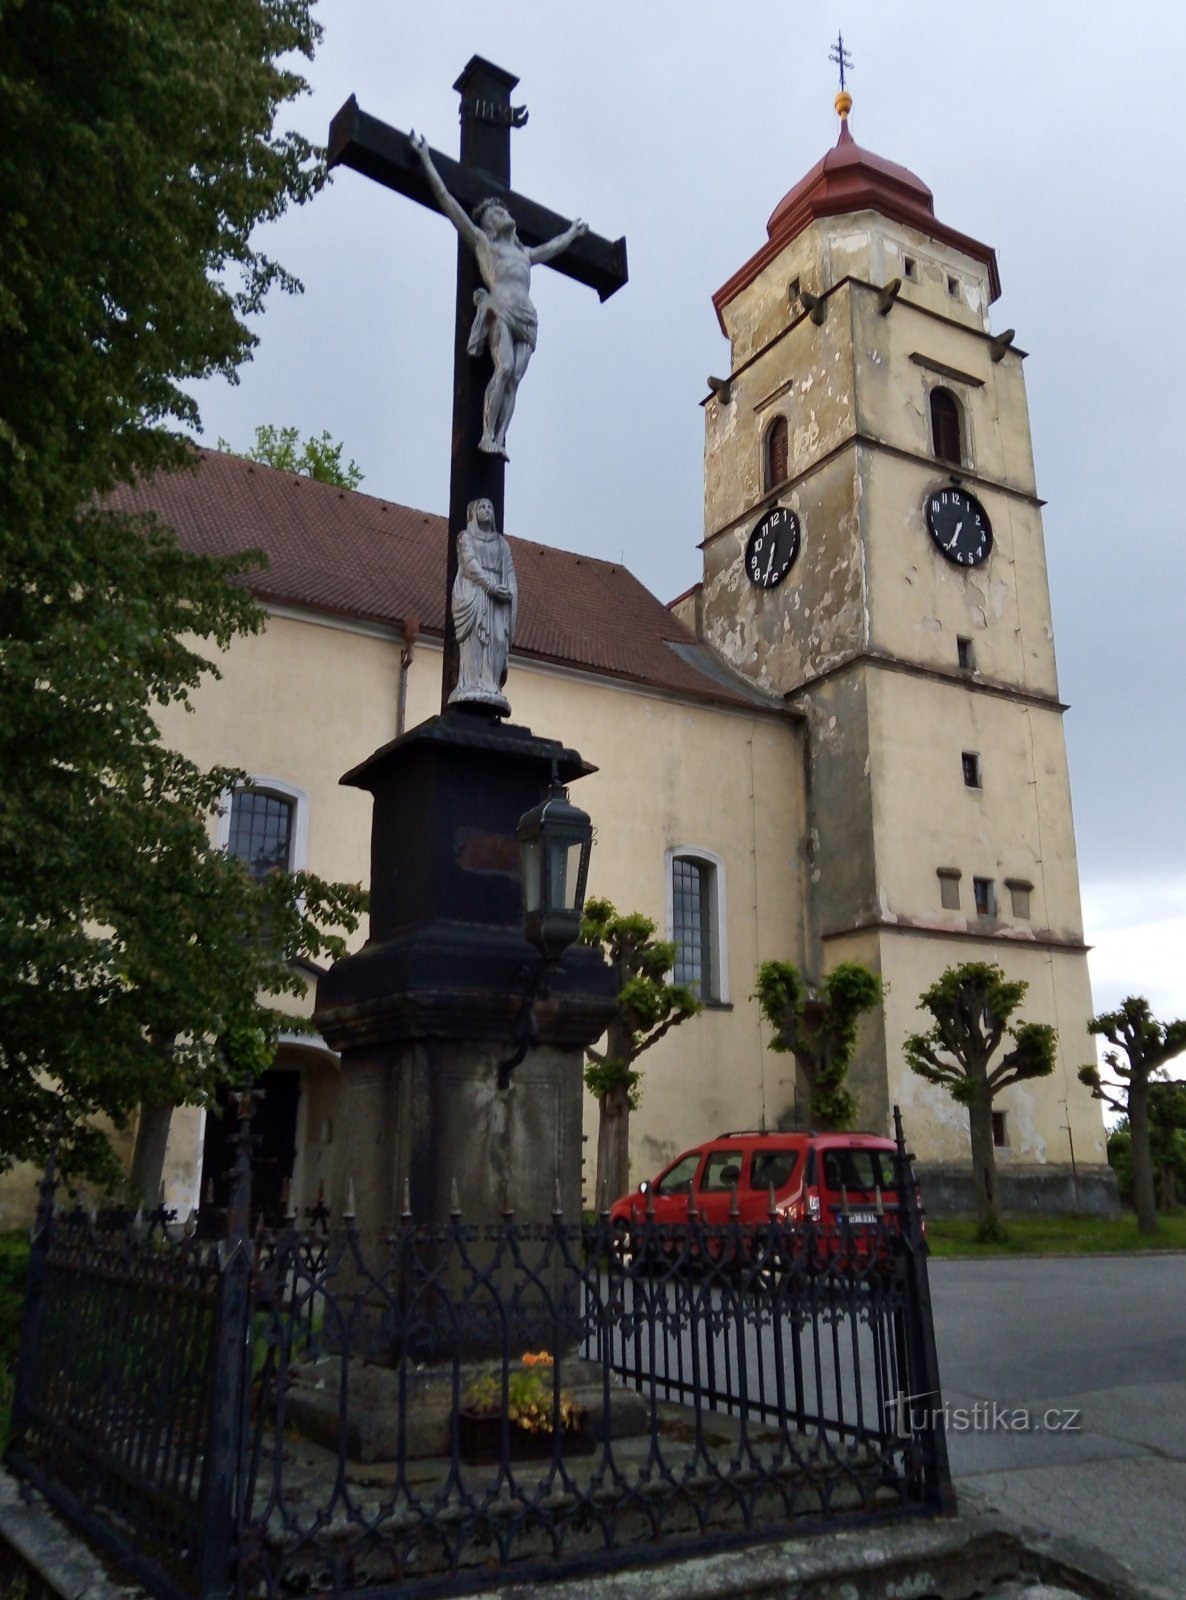 the church and the cross in front of it are listed